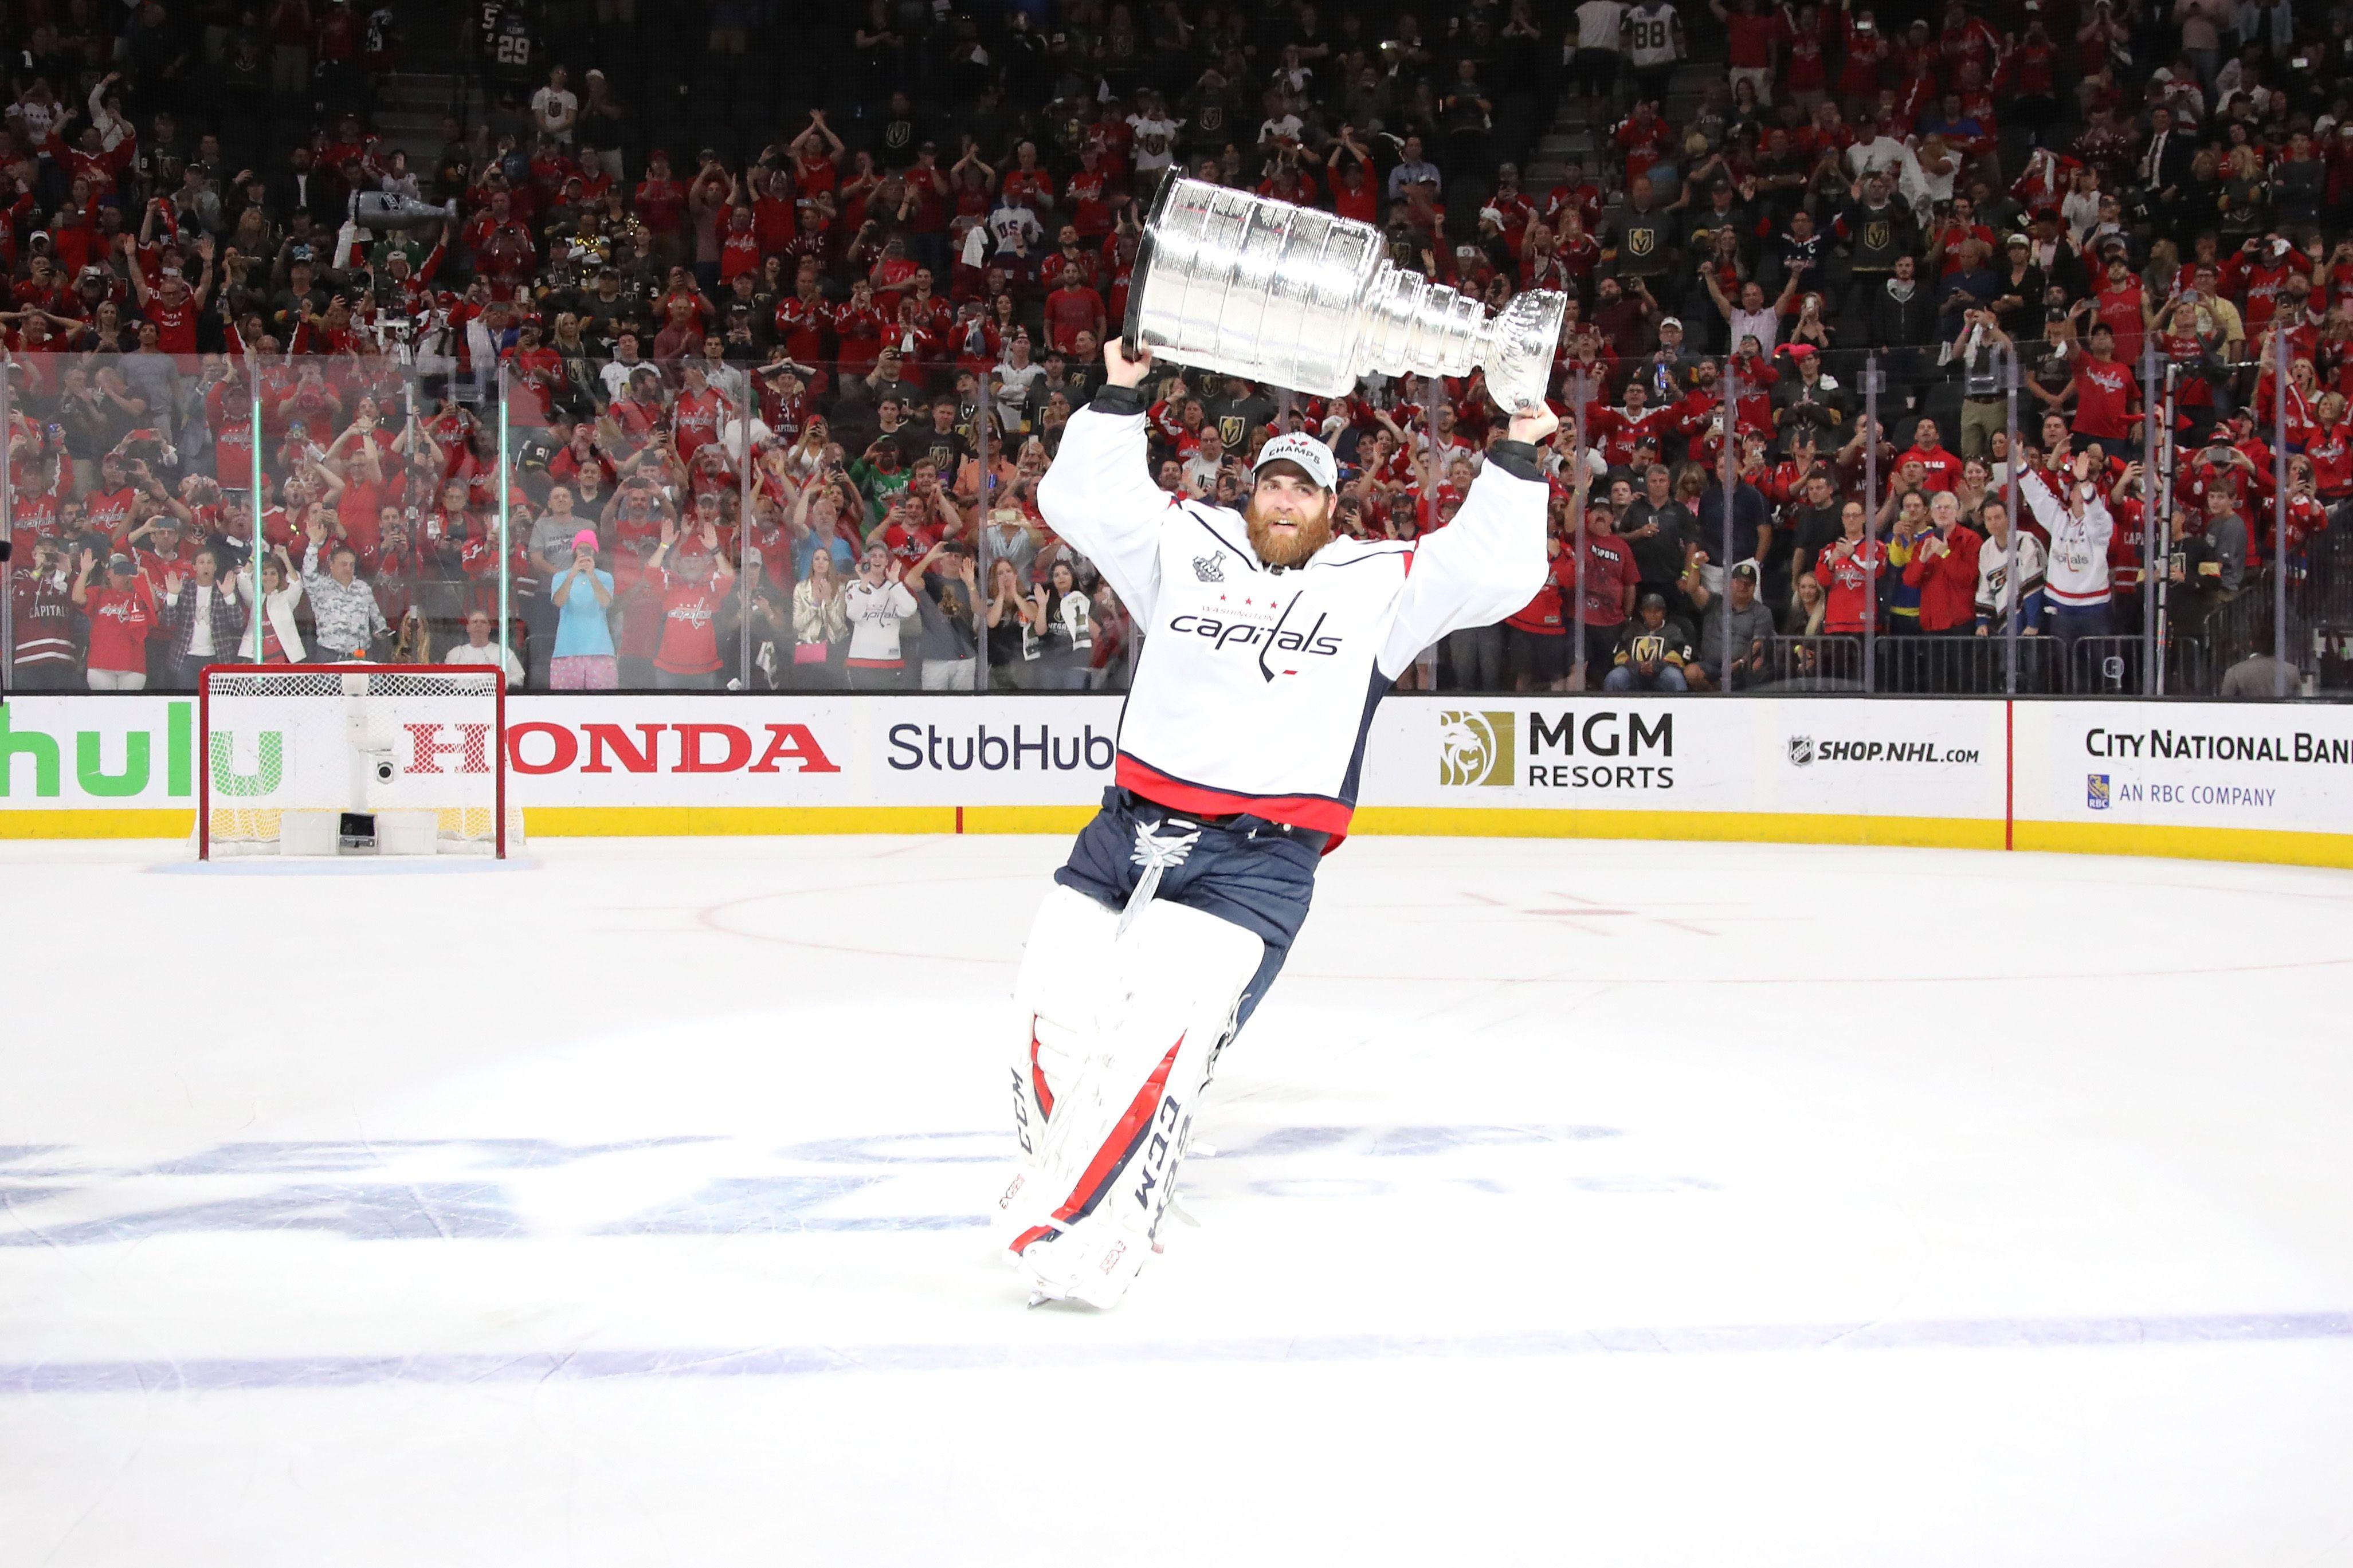 Braden Holtby Said Doing Interviews Was A 'Buzzkill' After Winning